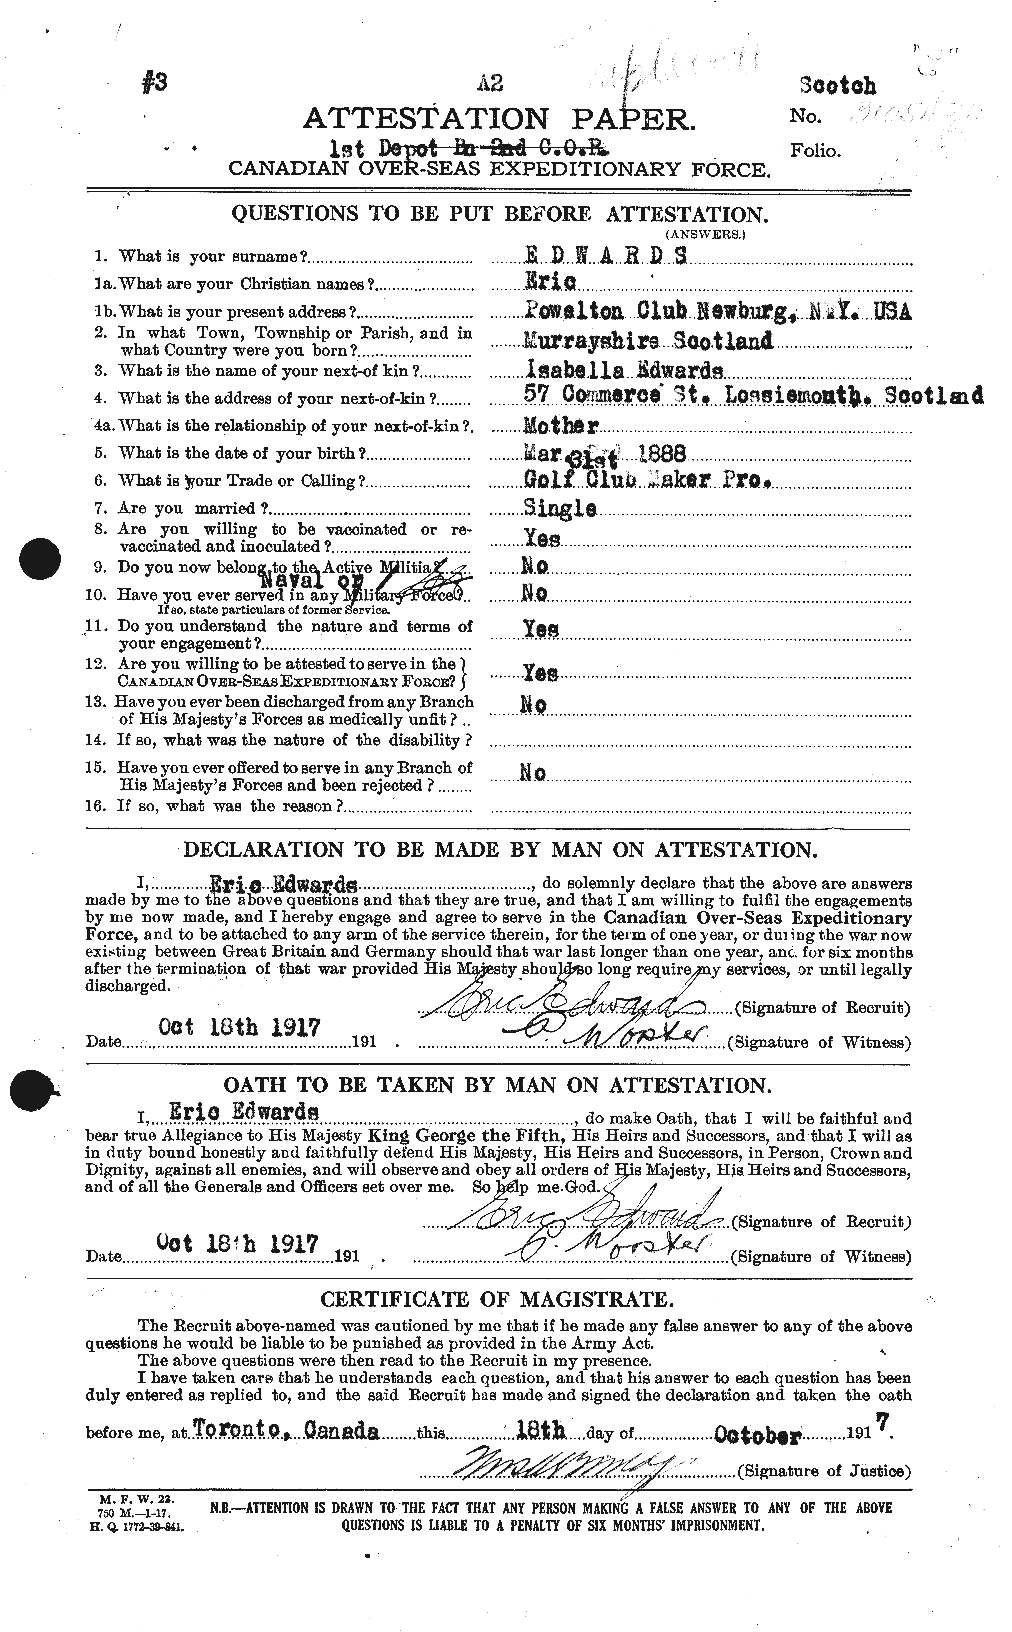 Personnel Records of the First World War - CEF 307917a